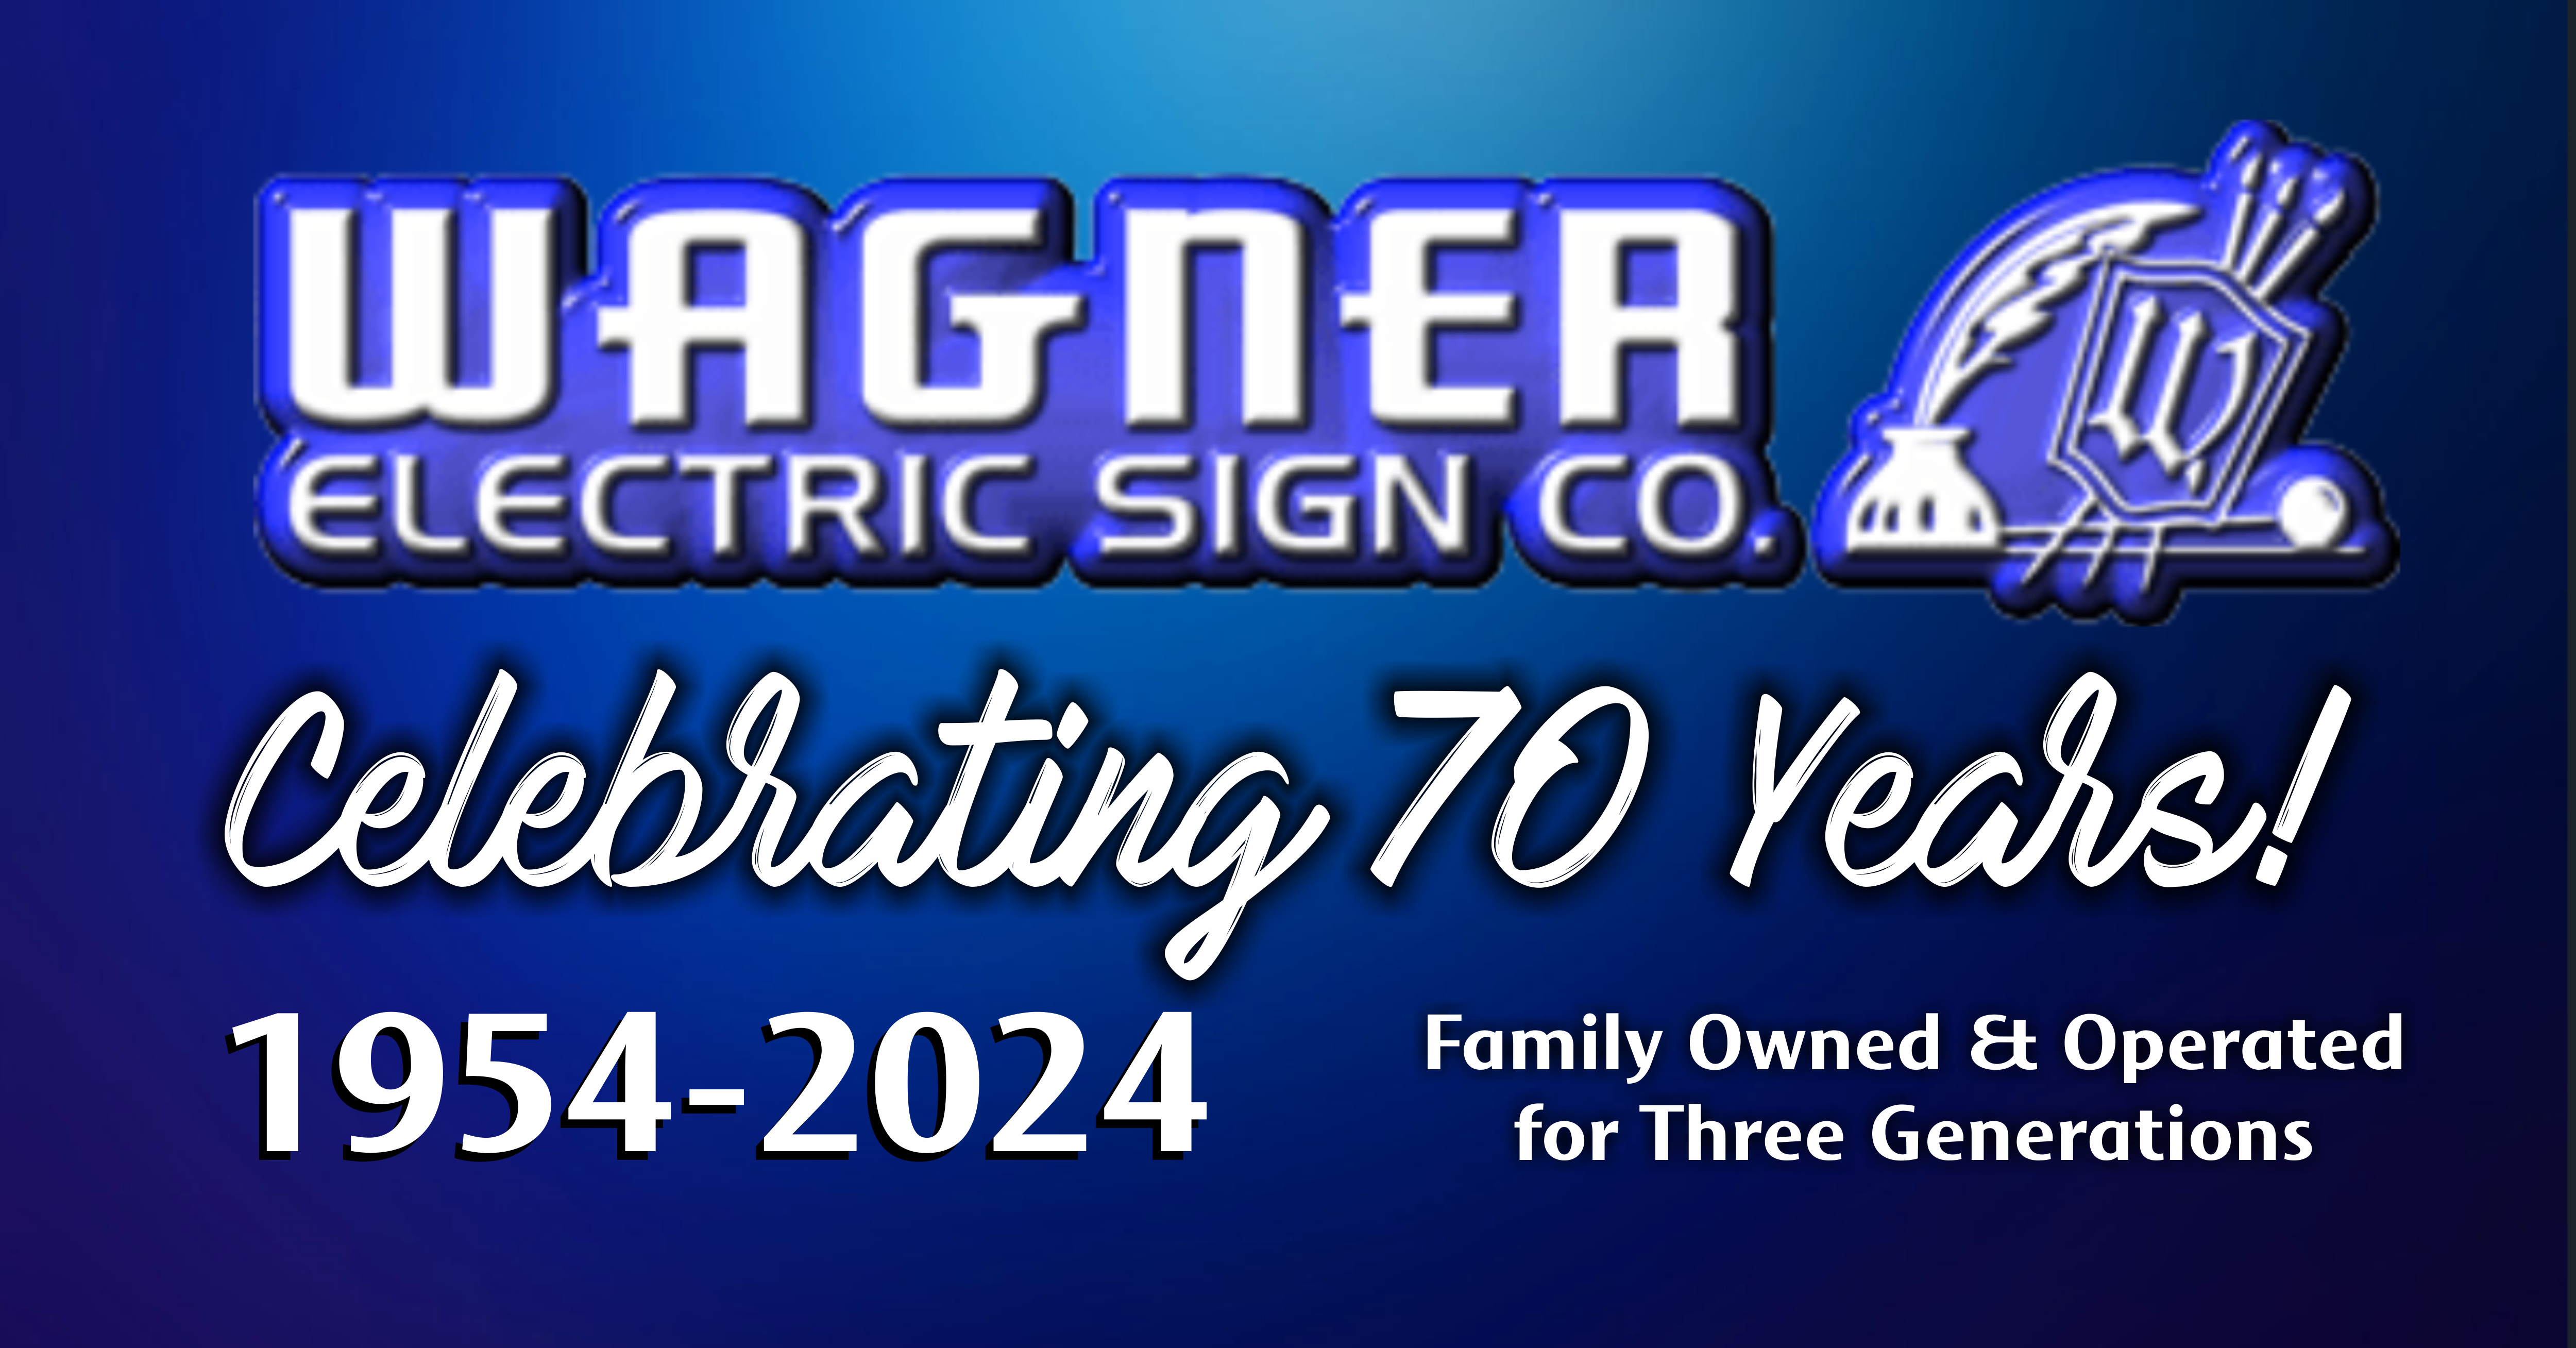 Wagner Electric Sign Co. in Elyria, OH celebrates 70 years in business